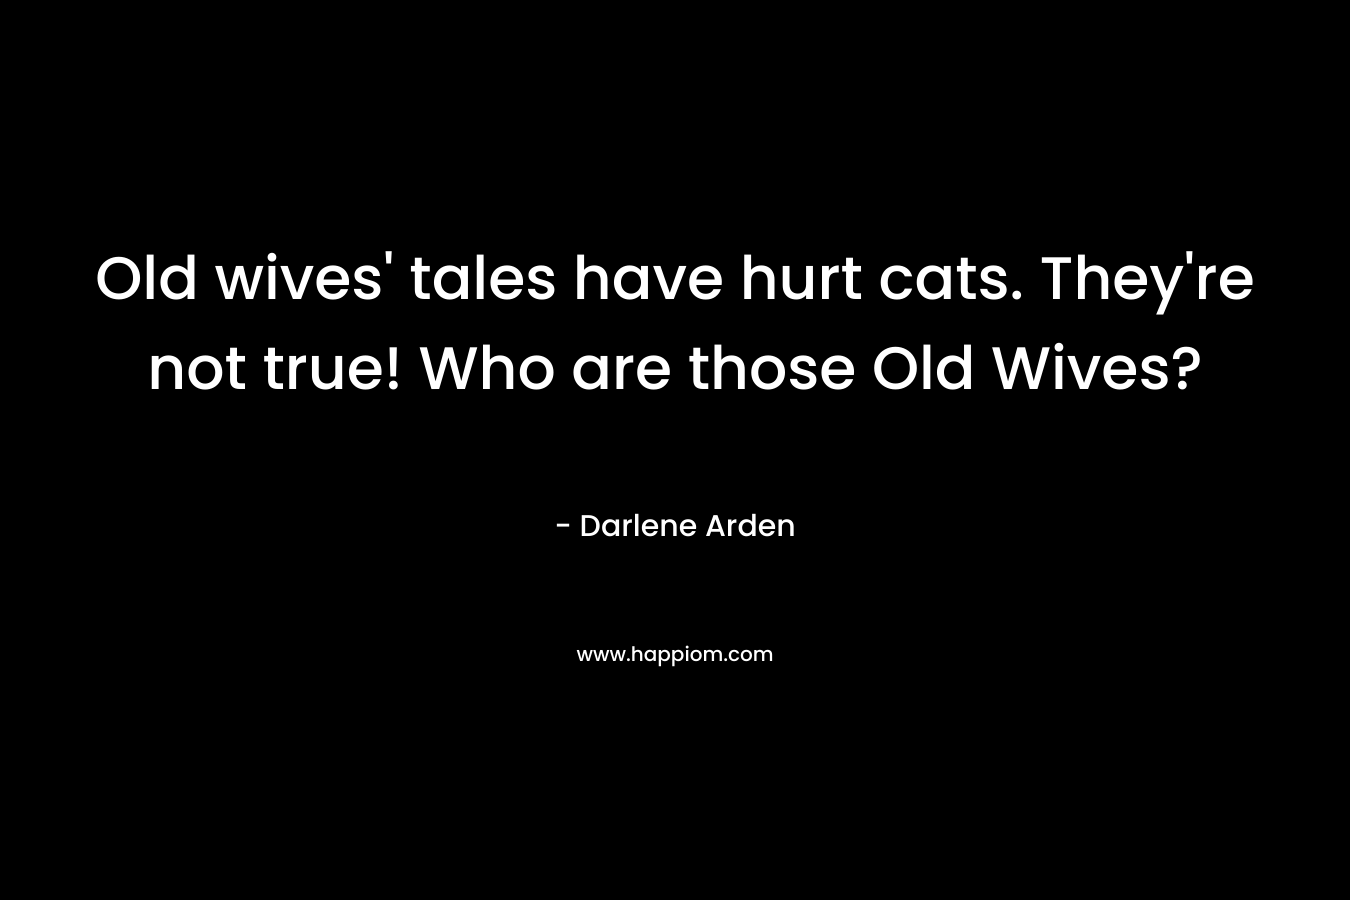 Old wives’ tales have hurt cats. They’re not true! Who are those Old Wives? – Darlene Arden